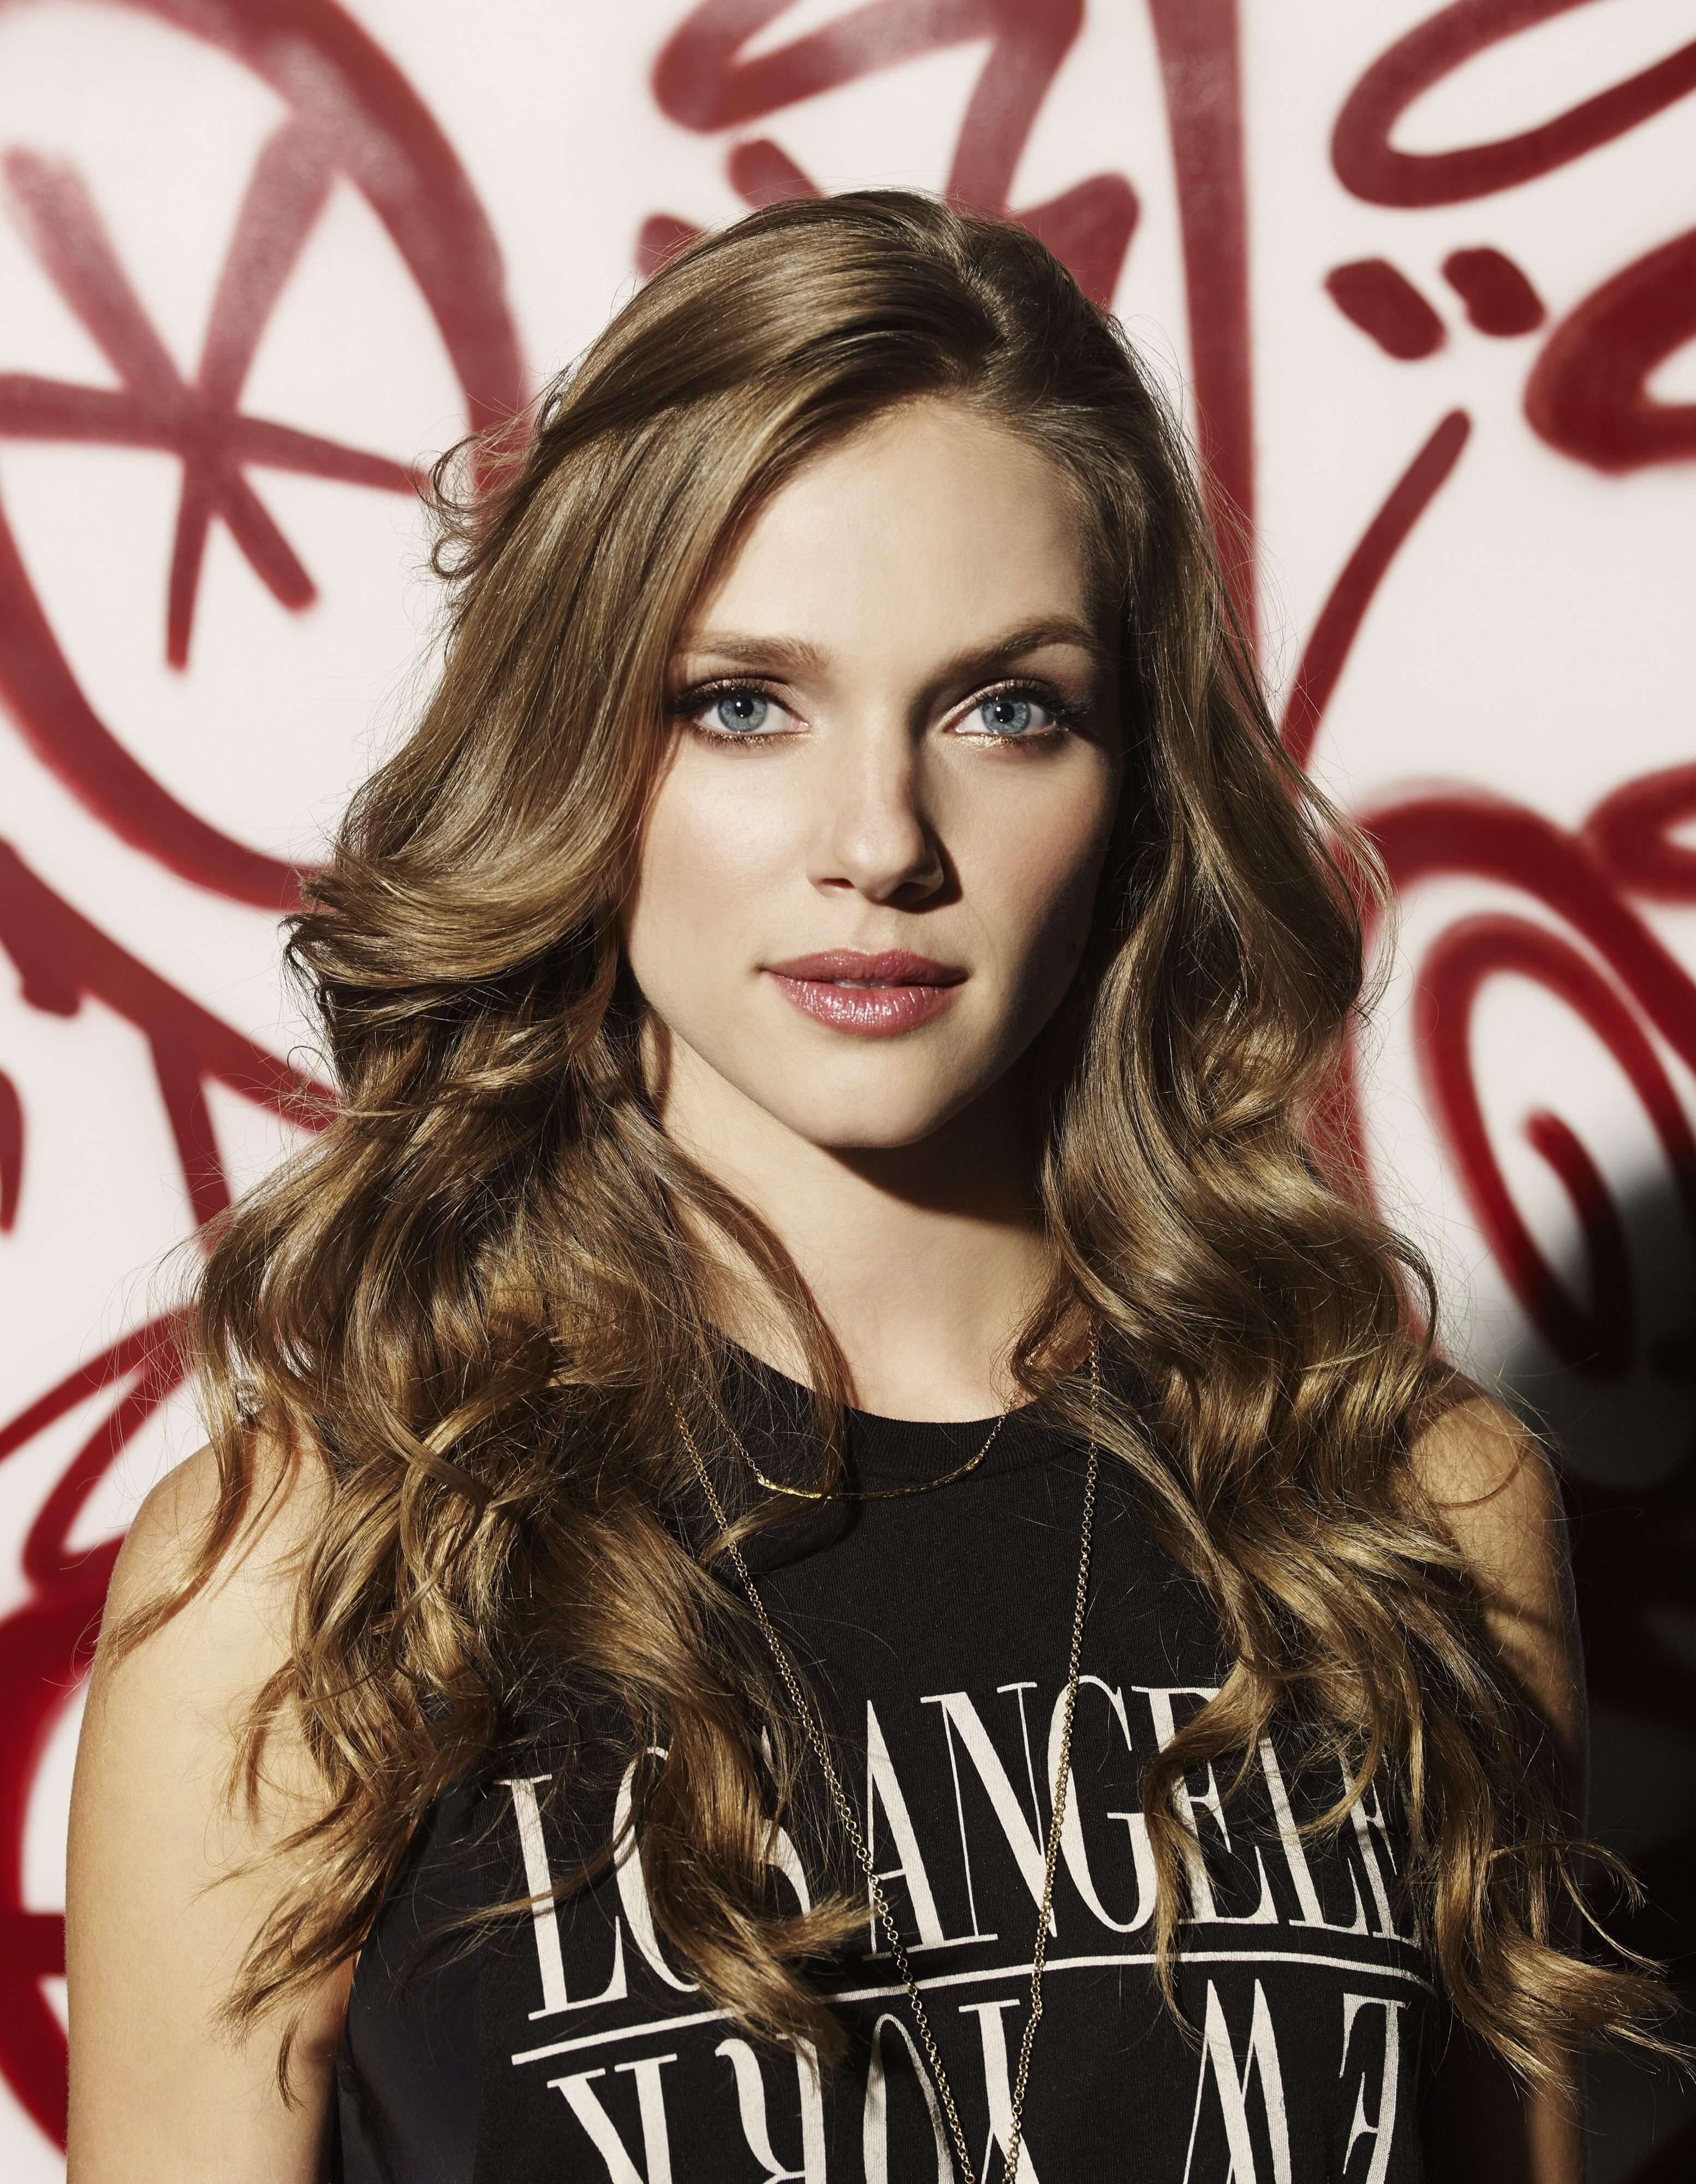 75+ Hot Pictures Of Tracy Spiridakos Are Truly Work Of Art | Best Of Comic Books